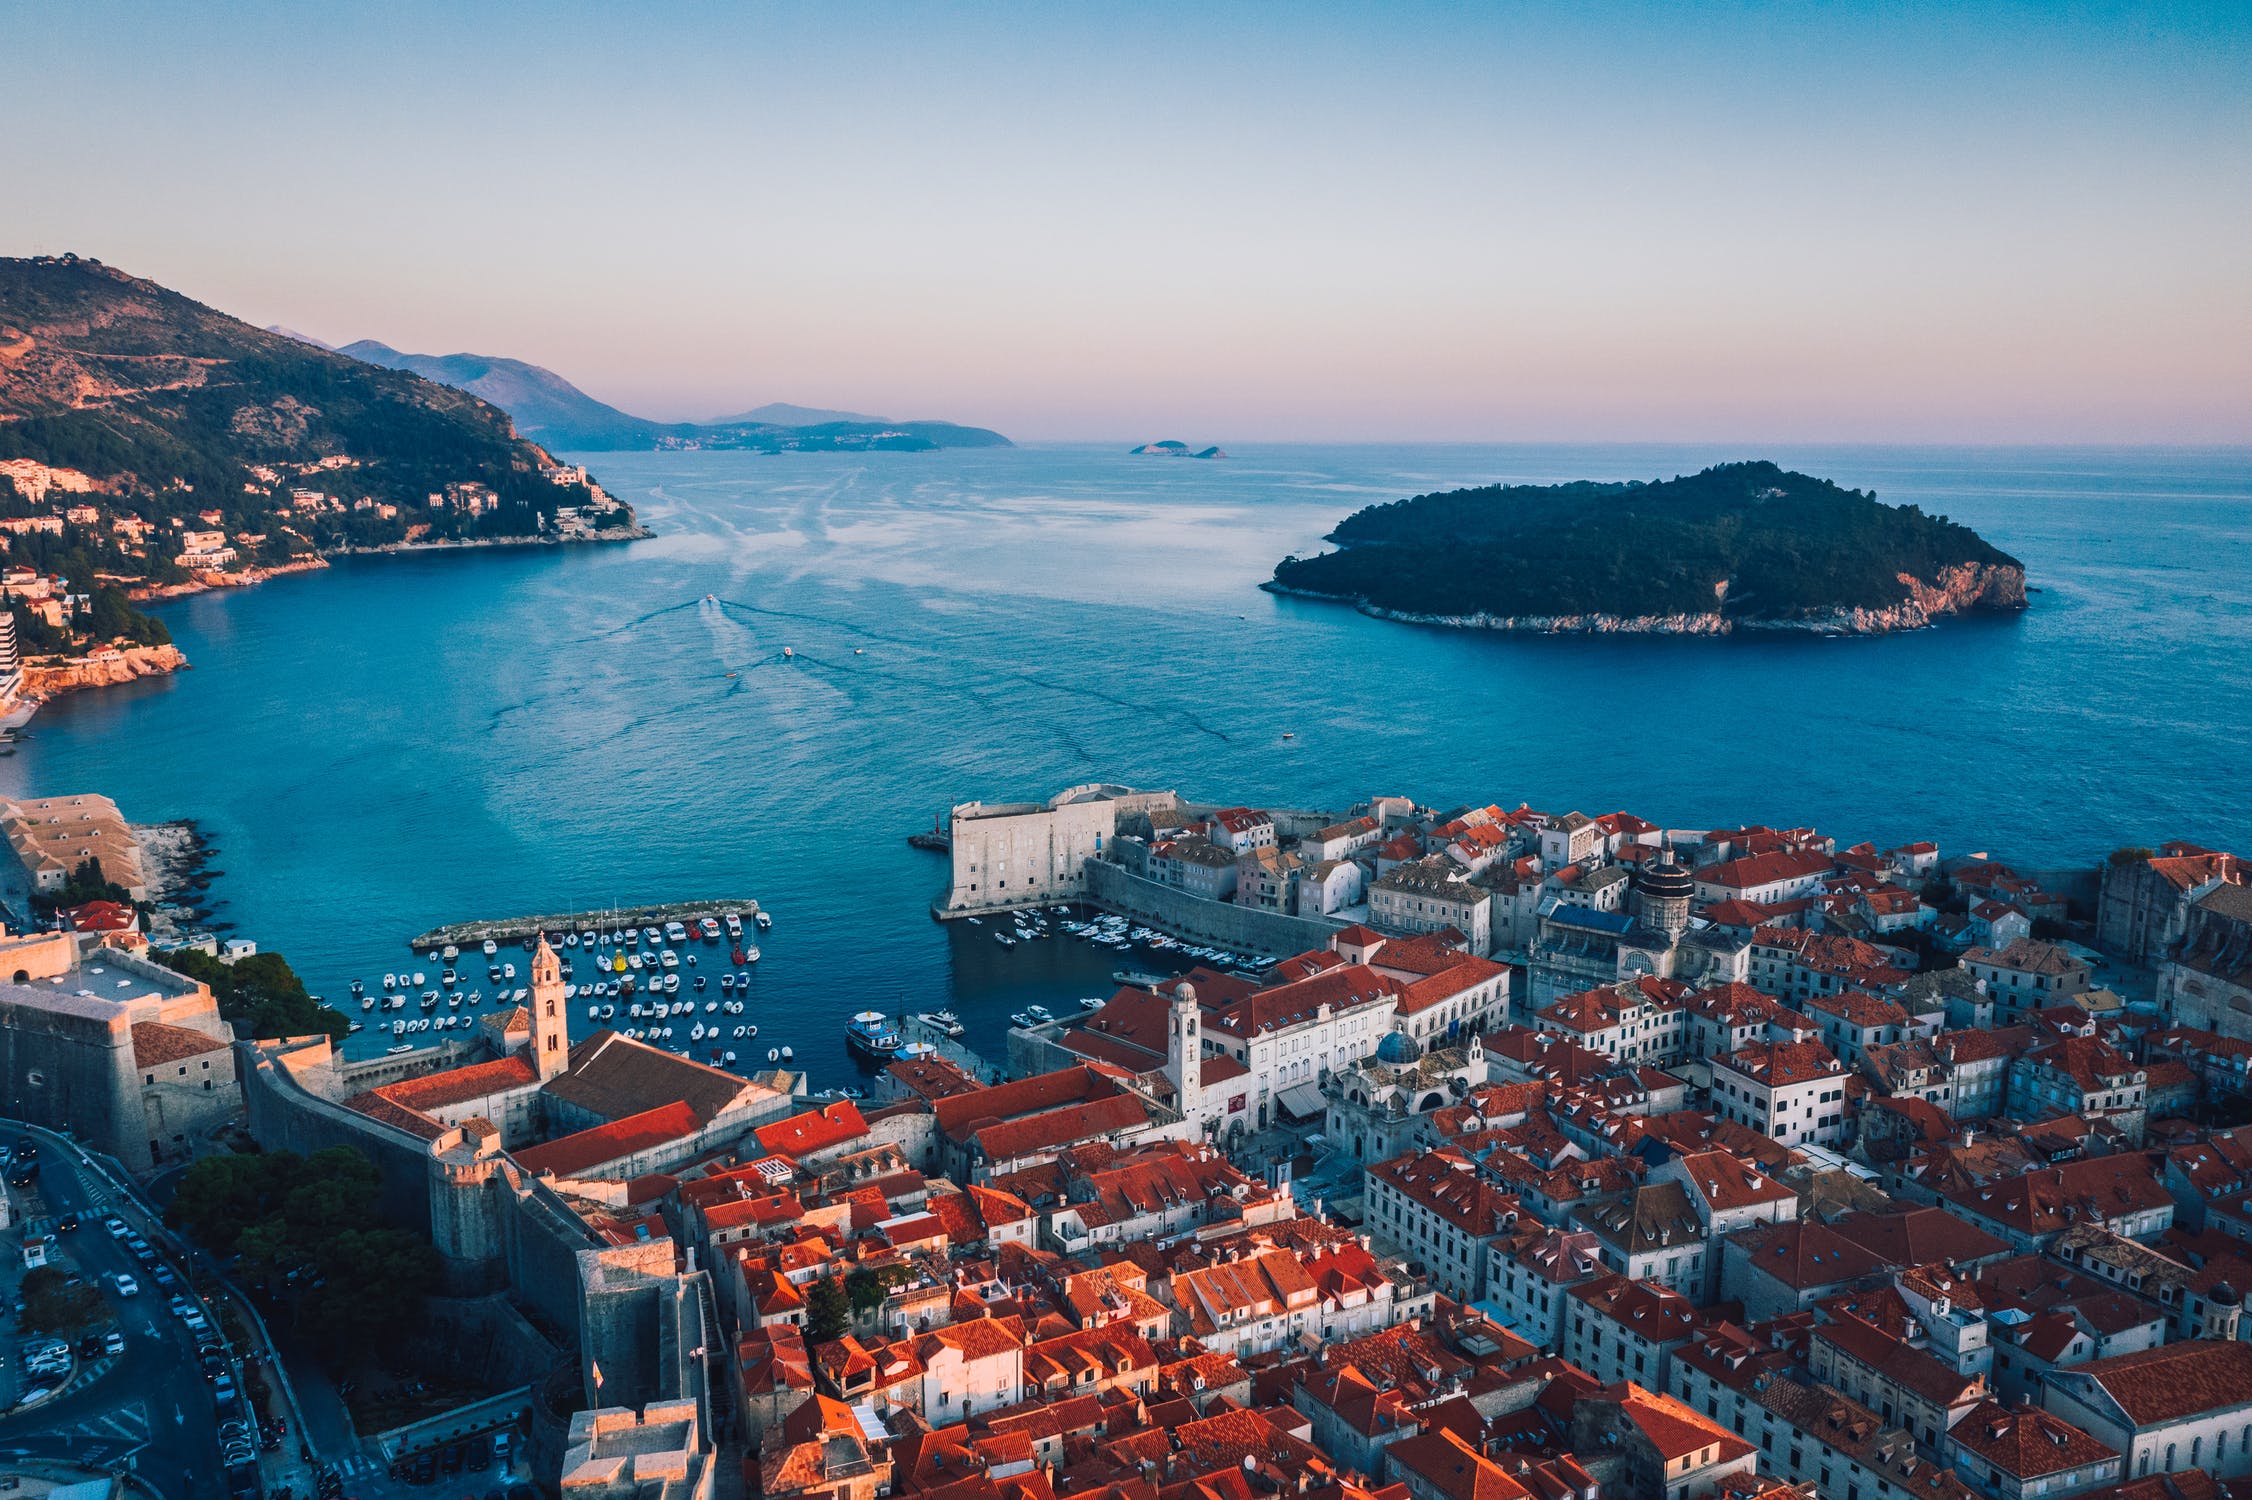 Aerial image of Dubrovnik looking out onto the sea